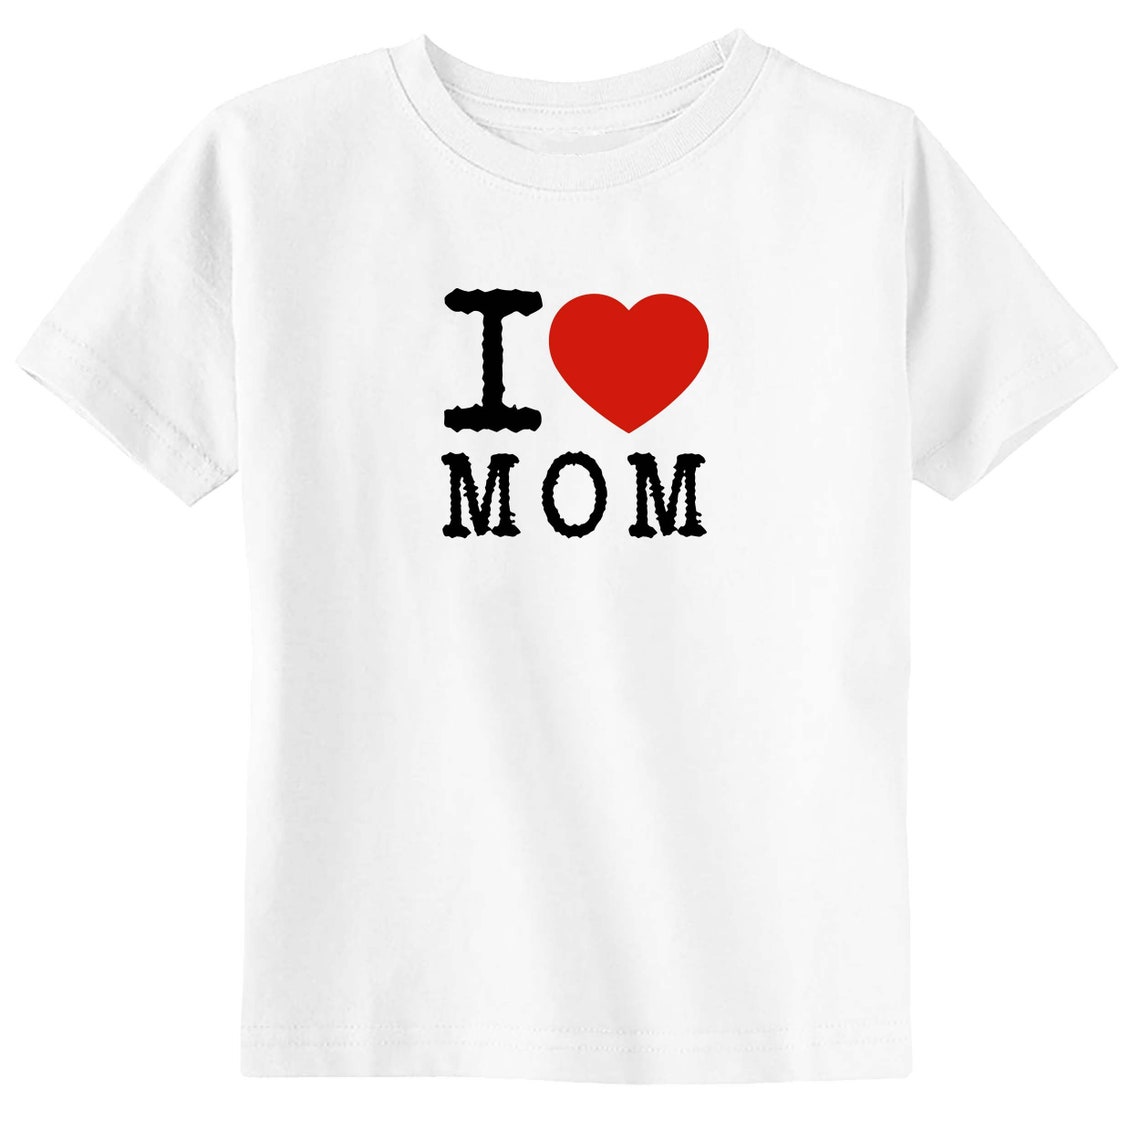 I HEART MOM Shirt Kids Mothers Day Outfit Unisex Toddler | Etsy